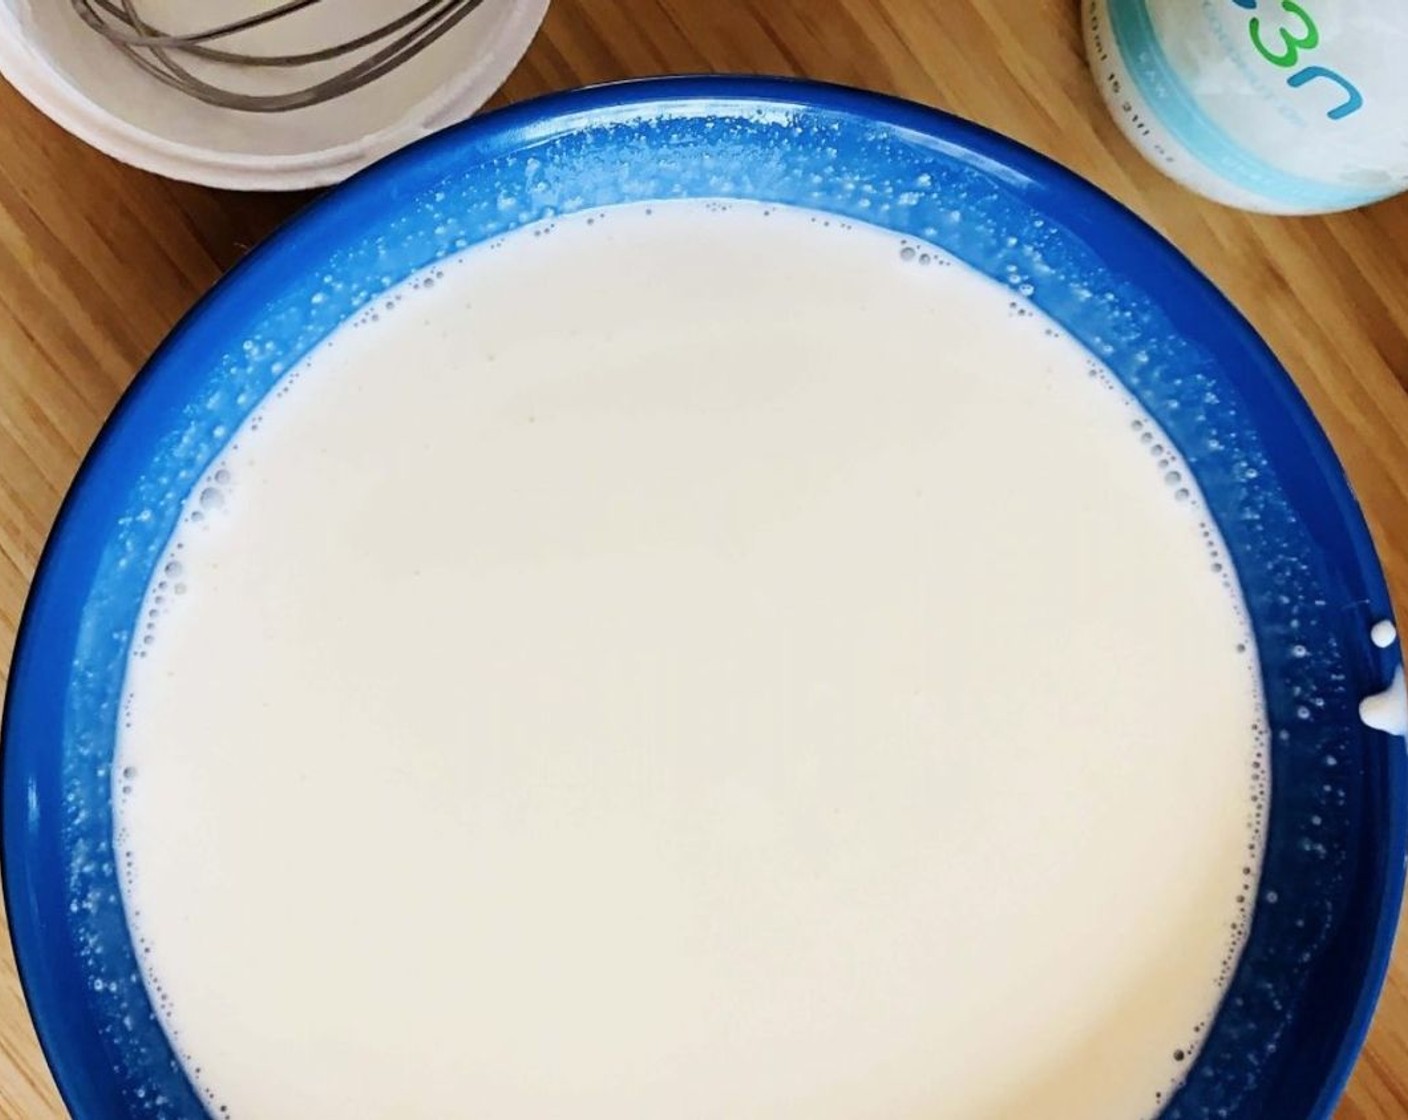 step 6 In a large bowl, stir together Greek Yogurt (1 1/4 cups), Sweetened Condensed Milk (2/3 cup), and Fresh Cream (2/3 cup) until well combined.